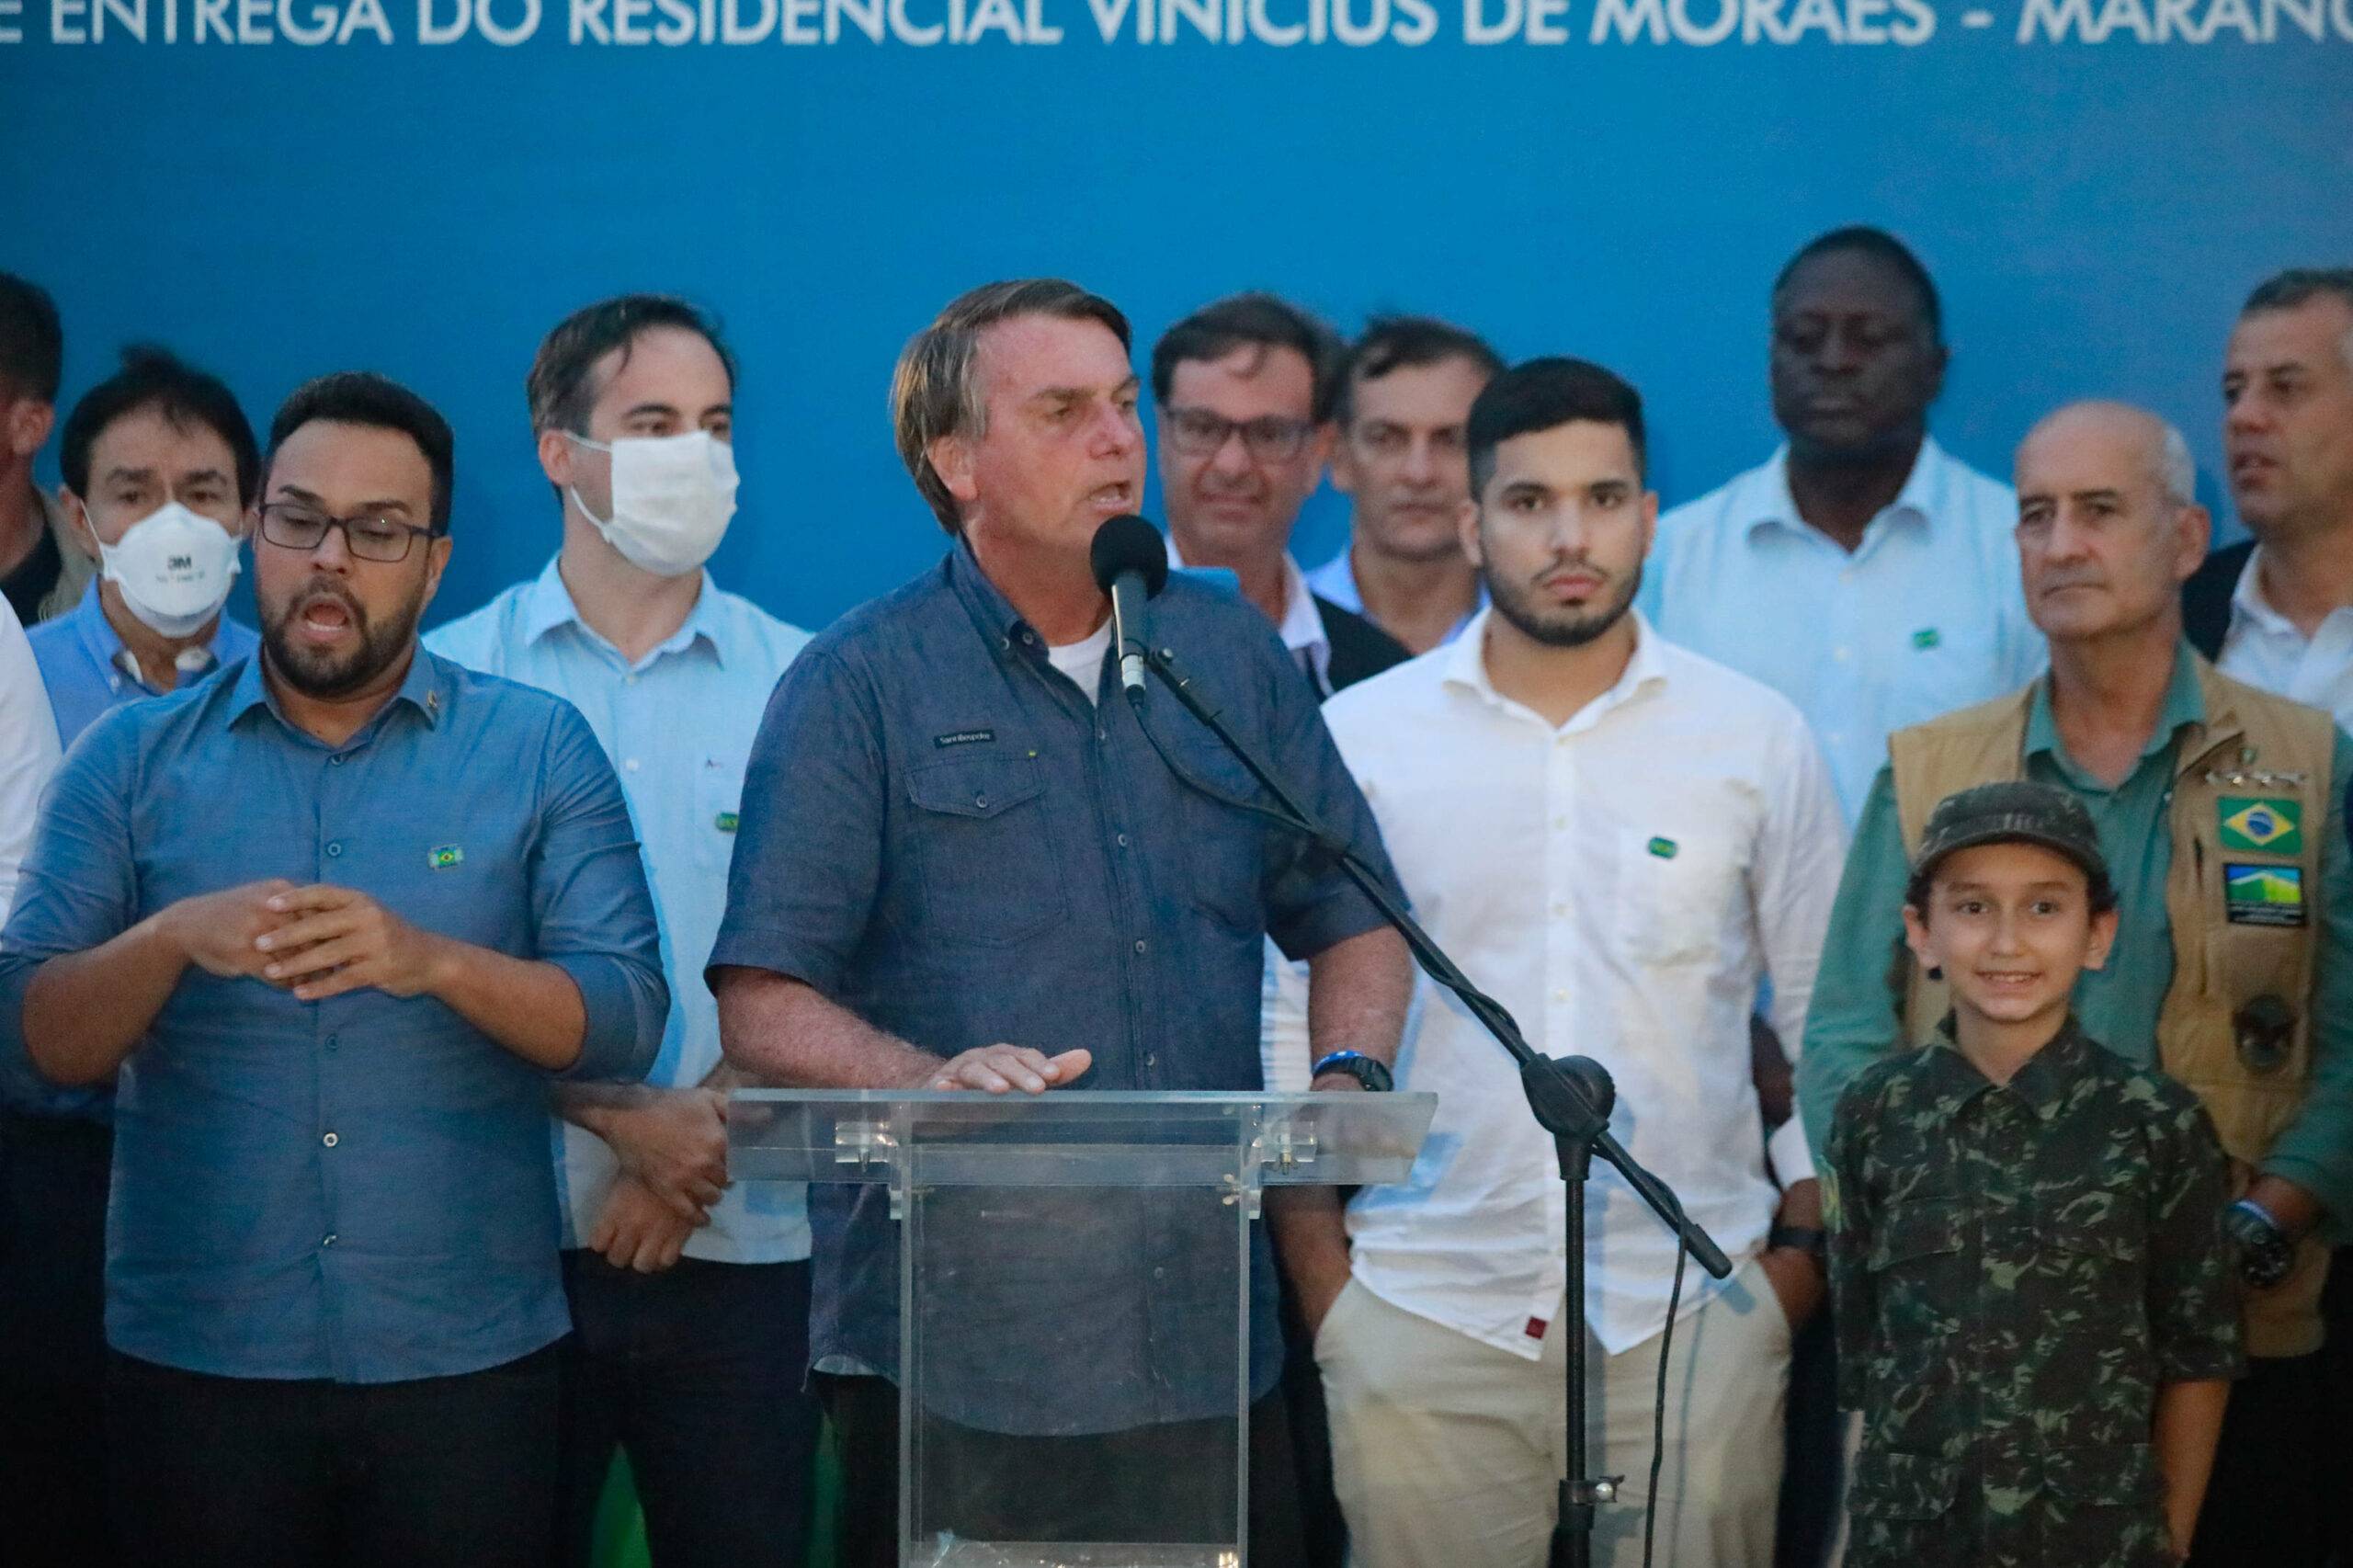 Visit of President Jair Bolsonaro to Ceará, for the inauguration of the road rings in the municipality of Caucaia and Maracanau, this Friday, February 26, 2021 in Fortaleza, Brazil.  President Jair Bolsonaro pronounced himself. (Photo: Lucas Moura/Fotoarena/Sipa USA)/32450894/Lucas Moura/2102271535